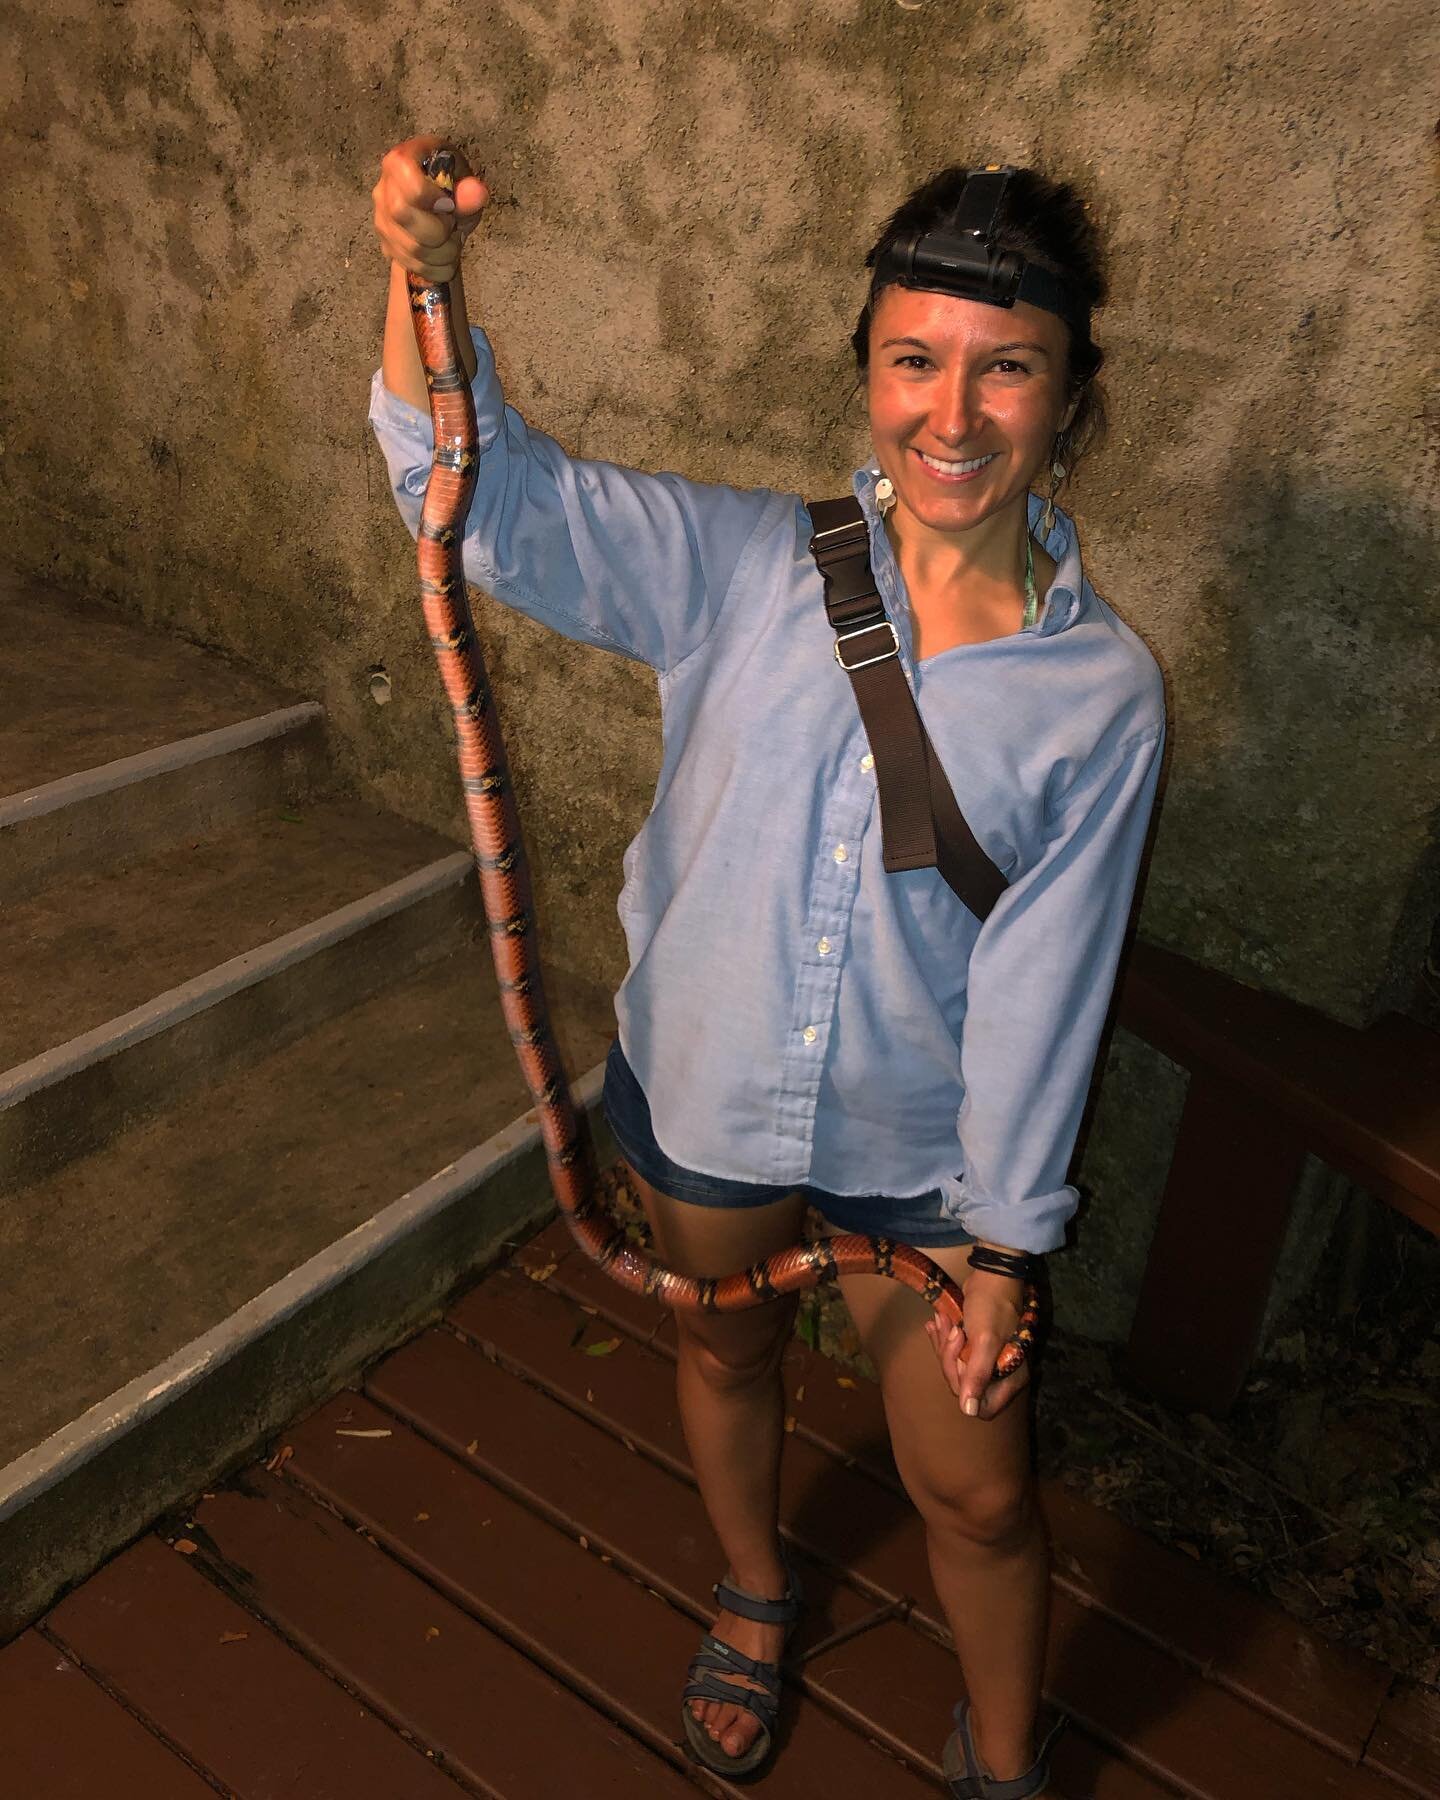 Vacation milestone achieved: catch a snake bigger than you!

Tropical Kingsnake (Lampropeltis triangulum), this beauty was traversing the wall on the walkway to our room last night. Its bright red, yellow and black bands have evolved to trick a wary 